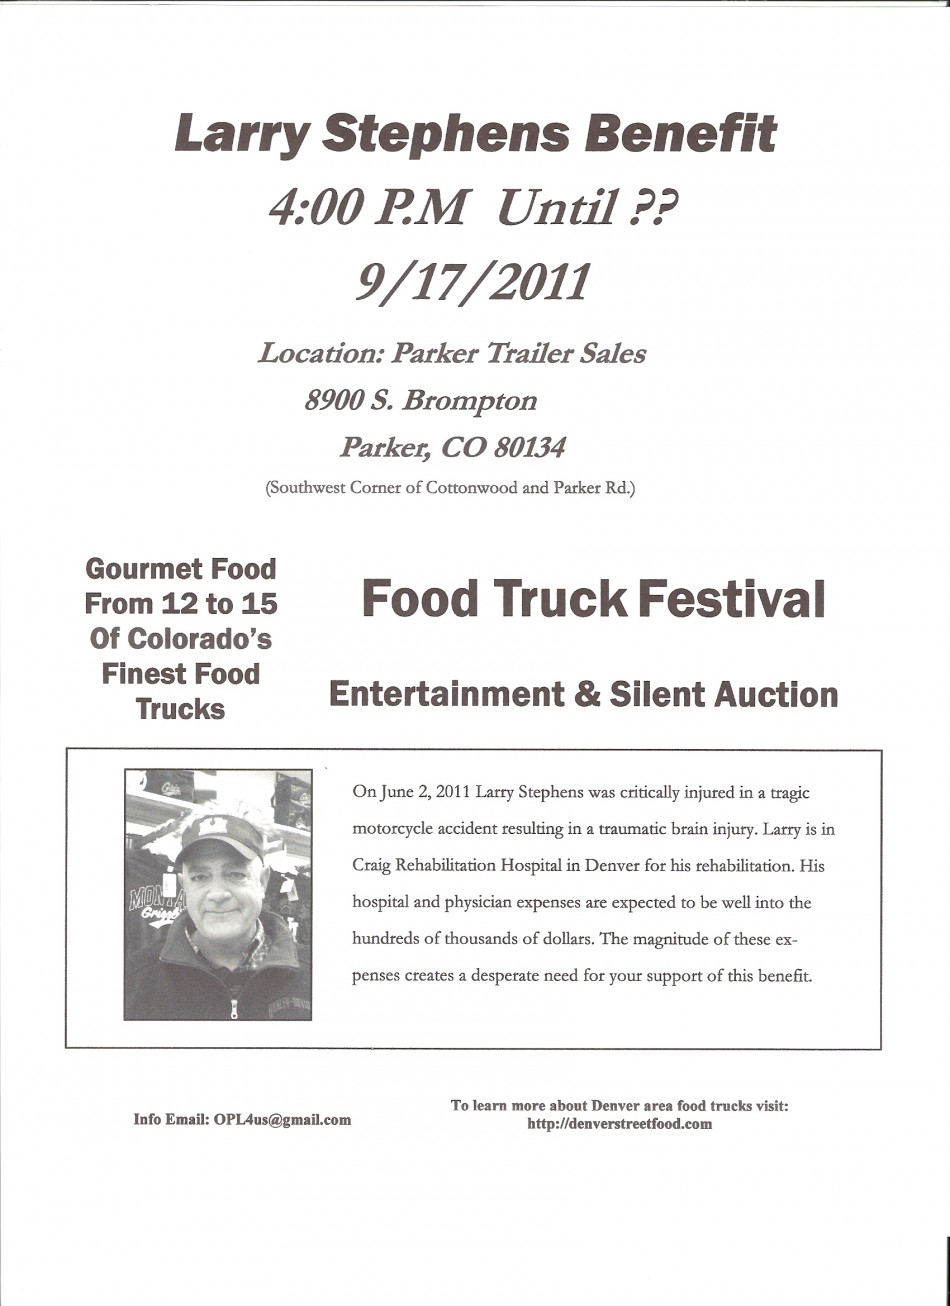 Chuck Courter is coordinating a street food party to benefit Larry Stephens